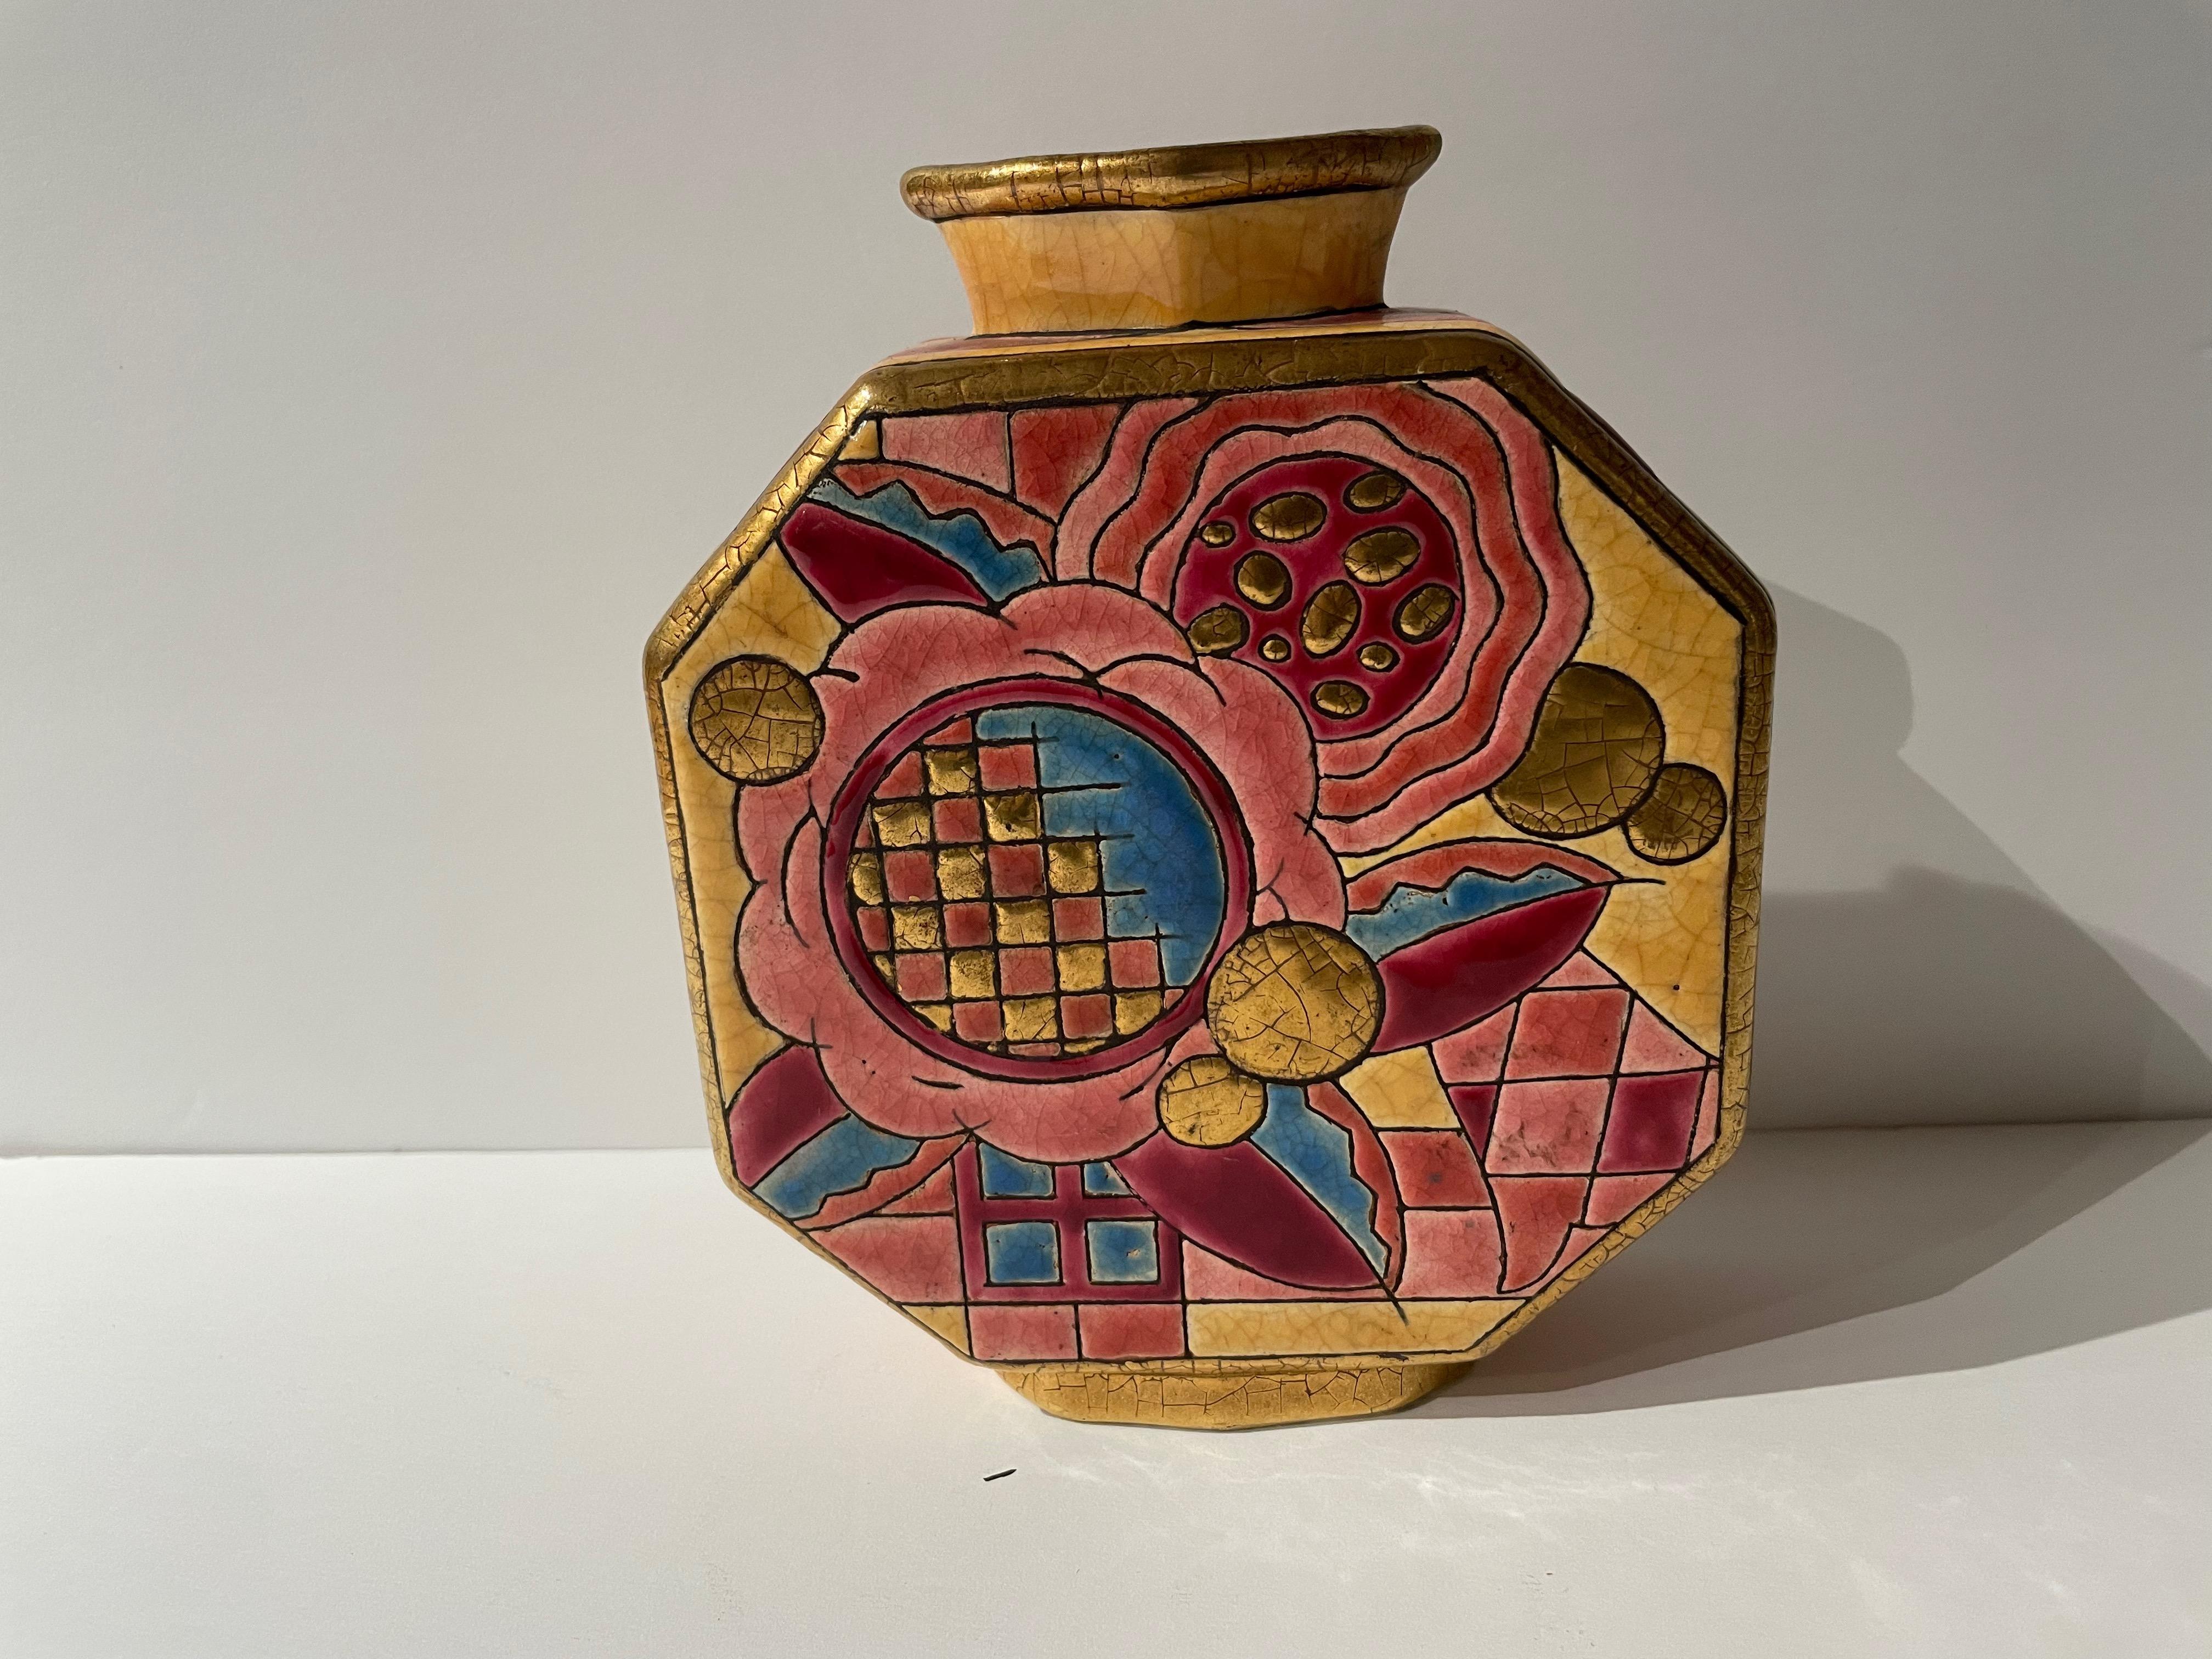 An Art Deco French Vase by Longwy from the late 1920s. This elaborately patterned and richly colored vase is highly collectible and appears in the history book of the famed Longwy Earthenware works. It mixes florals, checkered design, and gilding on